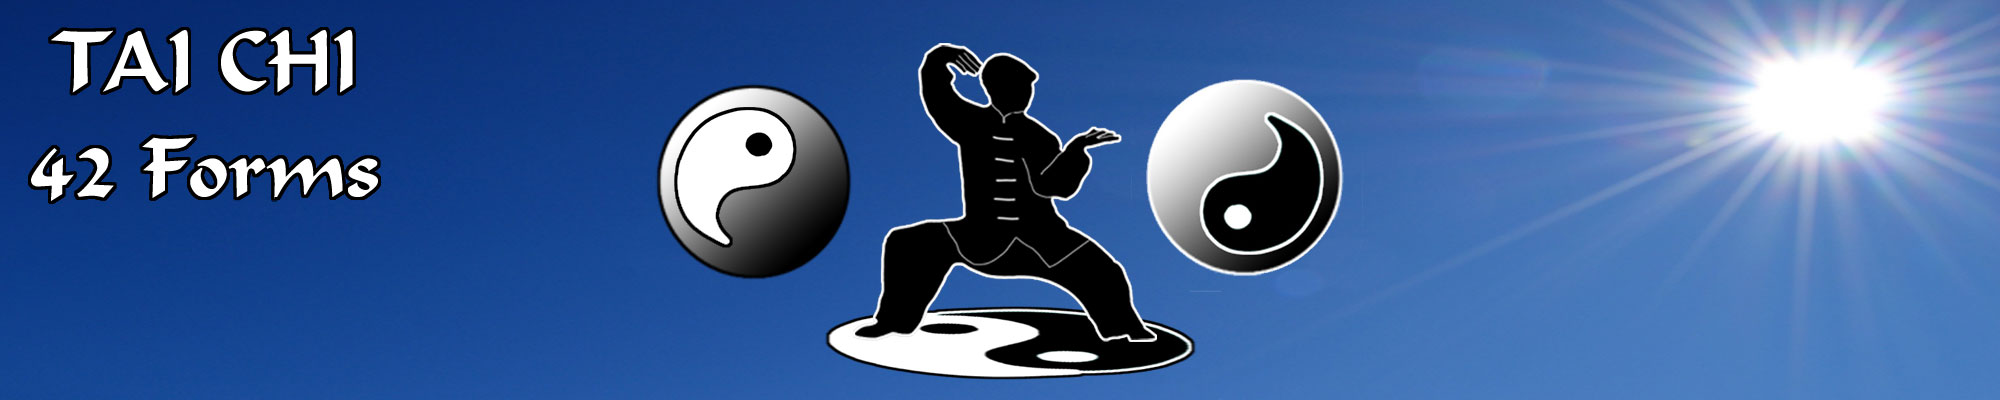 TaiChi posture image 1 - TAI CHI 42 Forms Online course for Health Wellness Energy